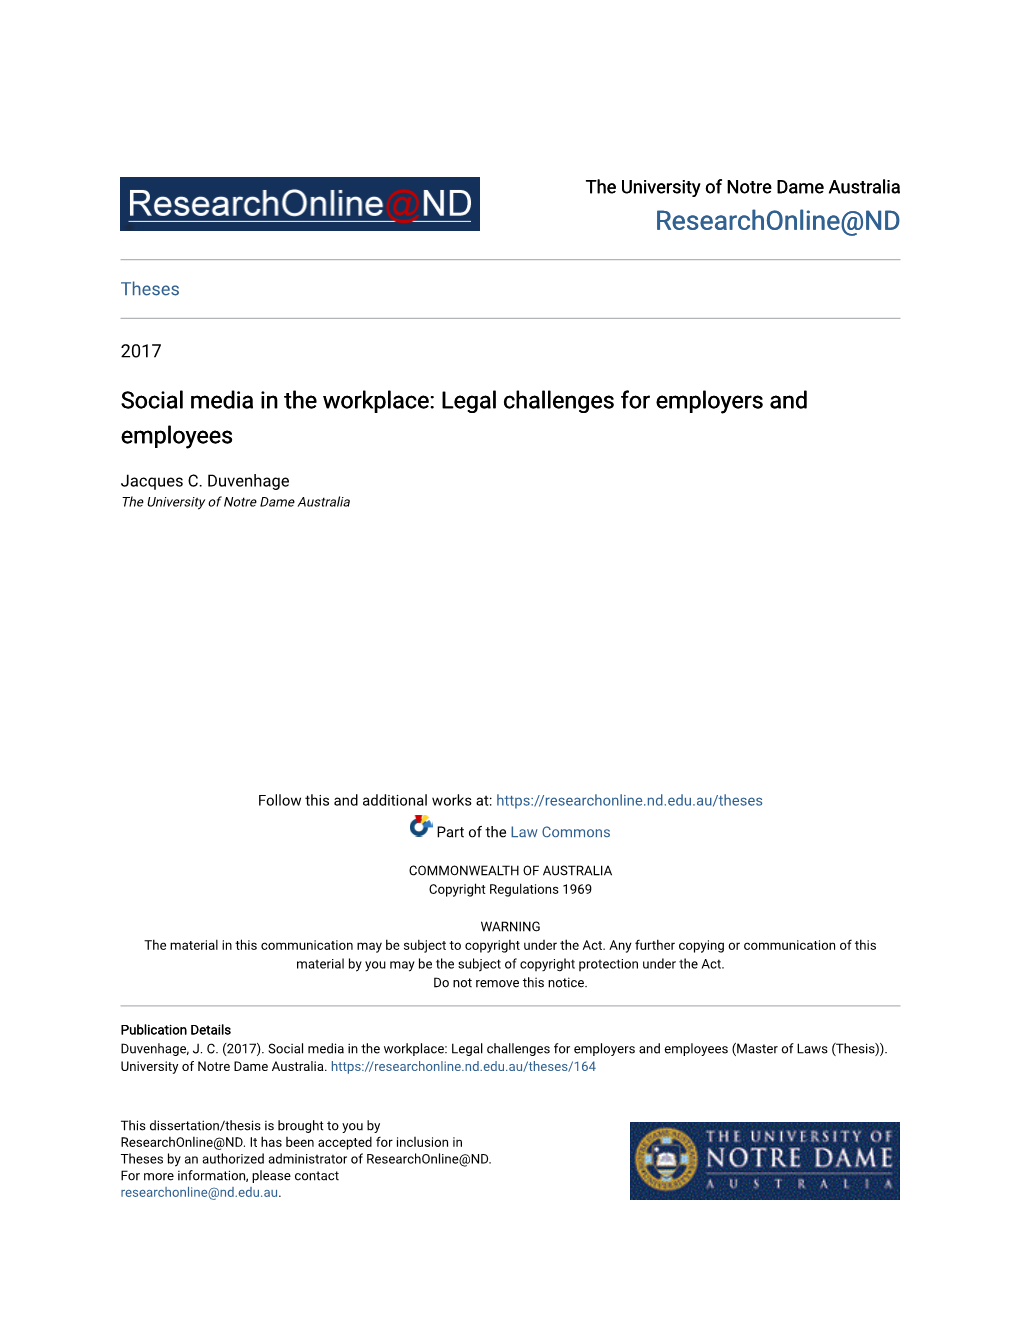 Social Media in the Workplace: Legal Challenges for Employers and Employees